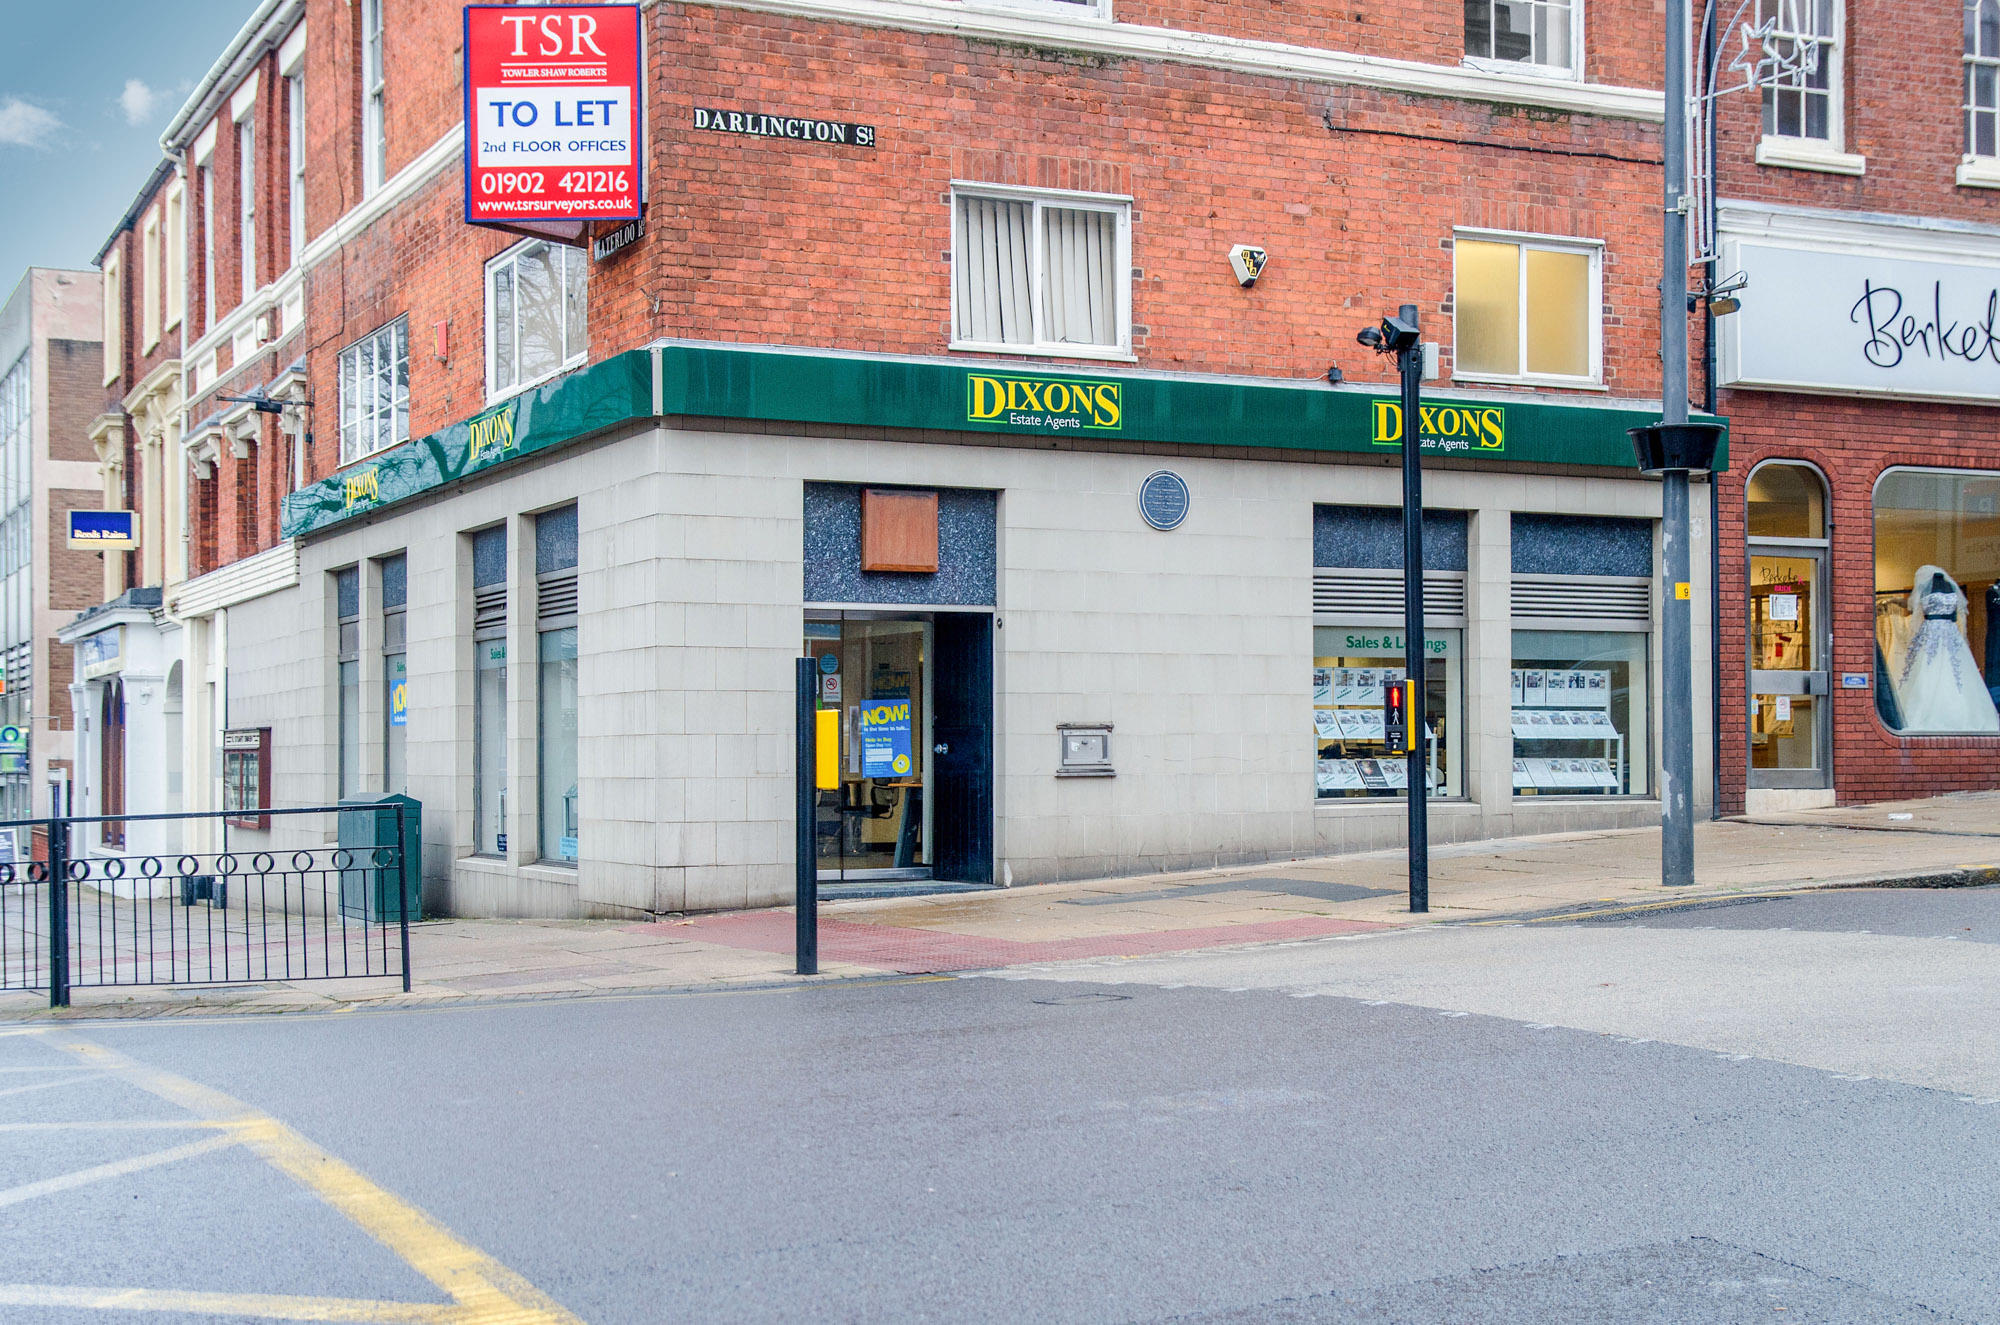 Images Dixons Sales and Letting Agents Wolverhampton